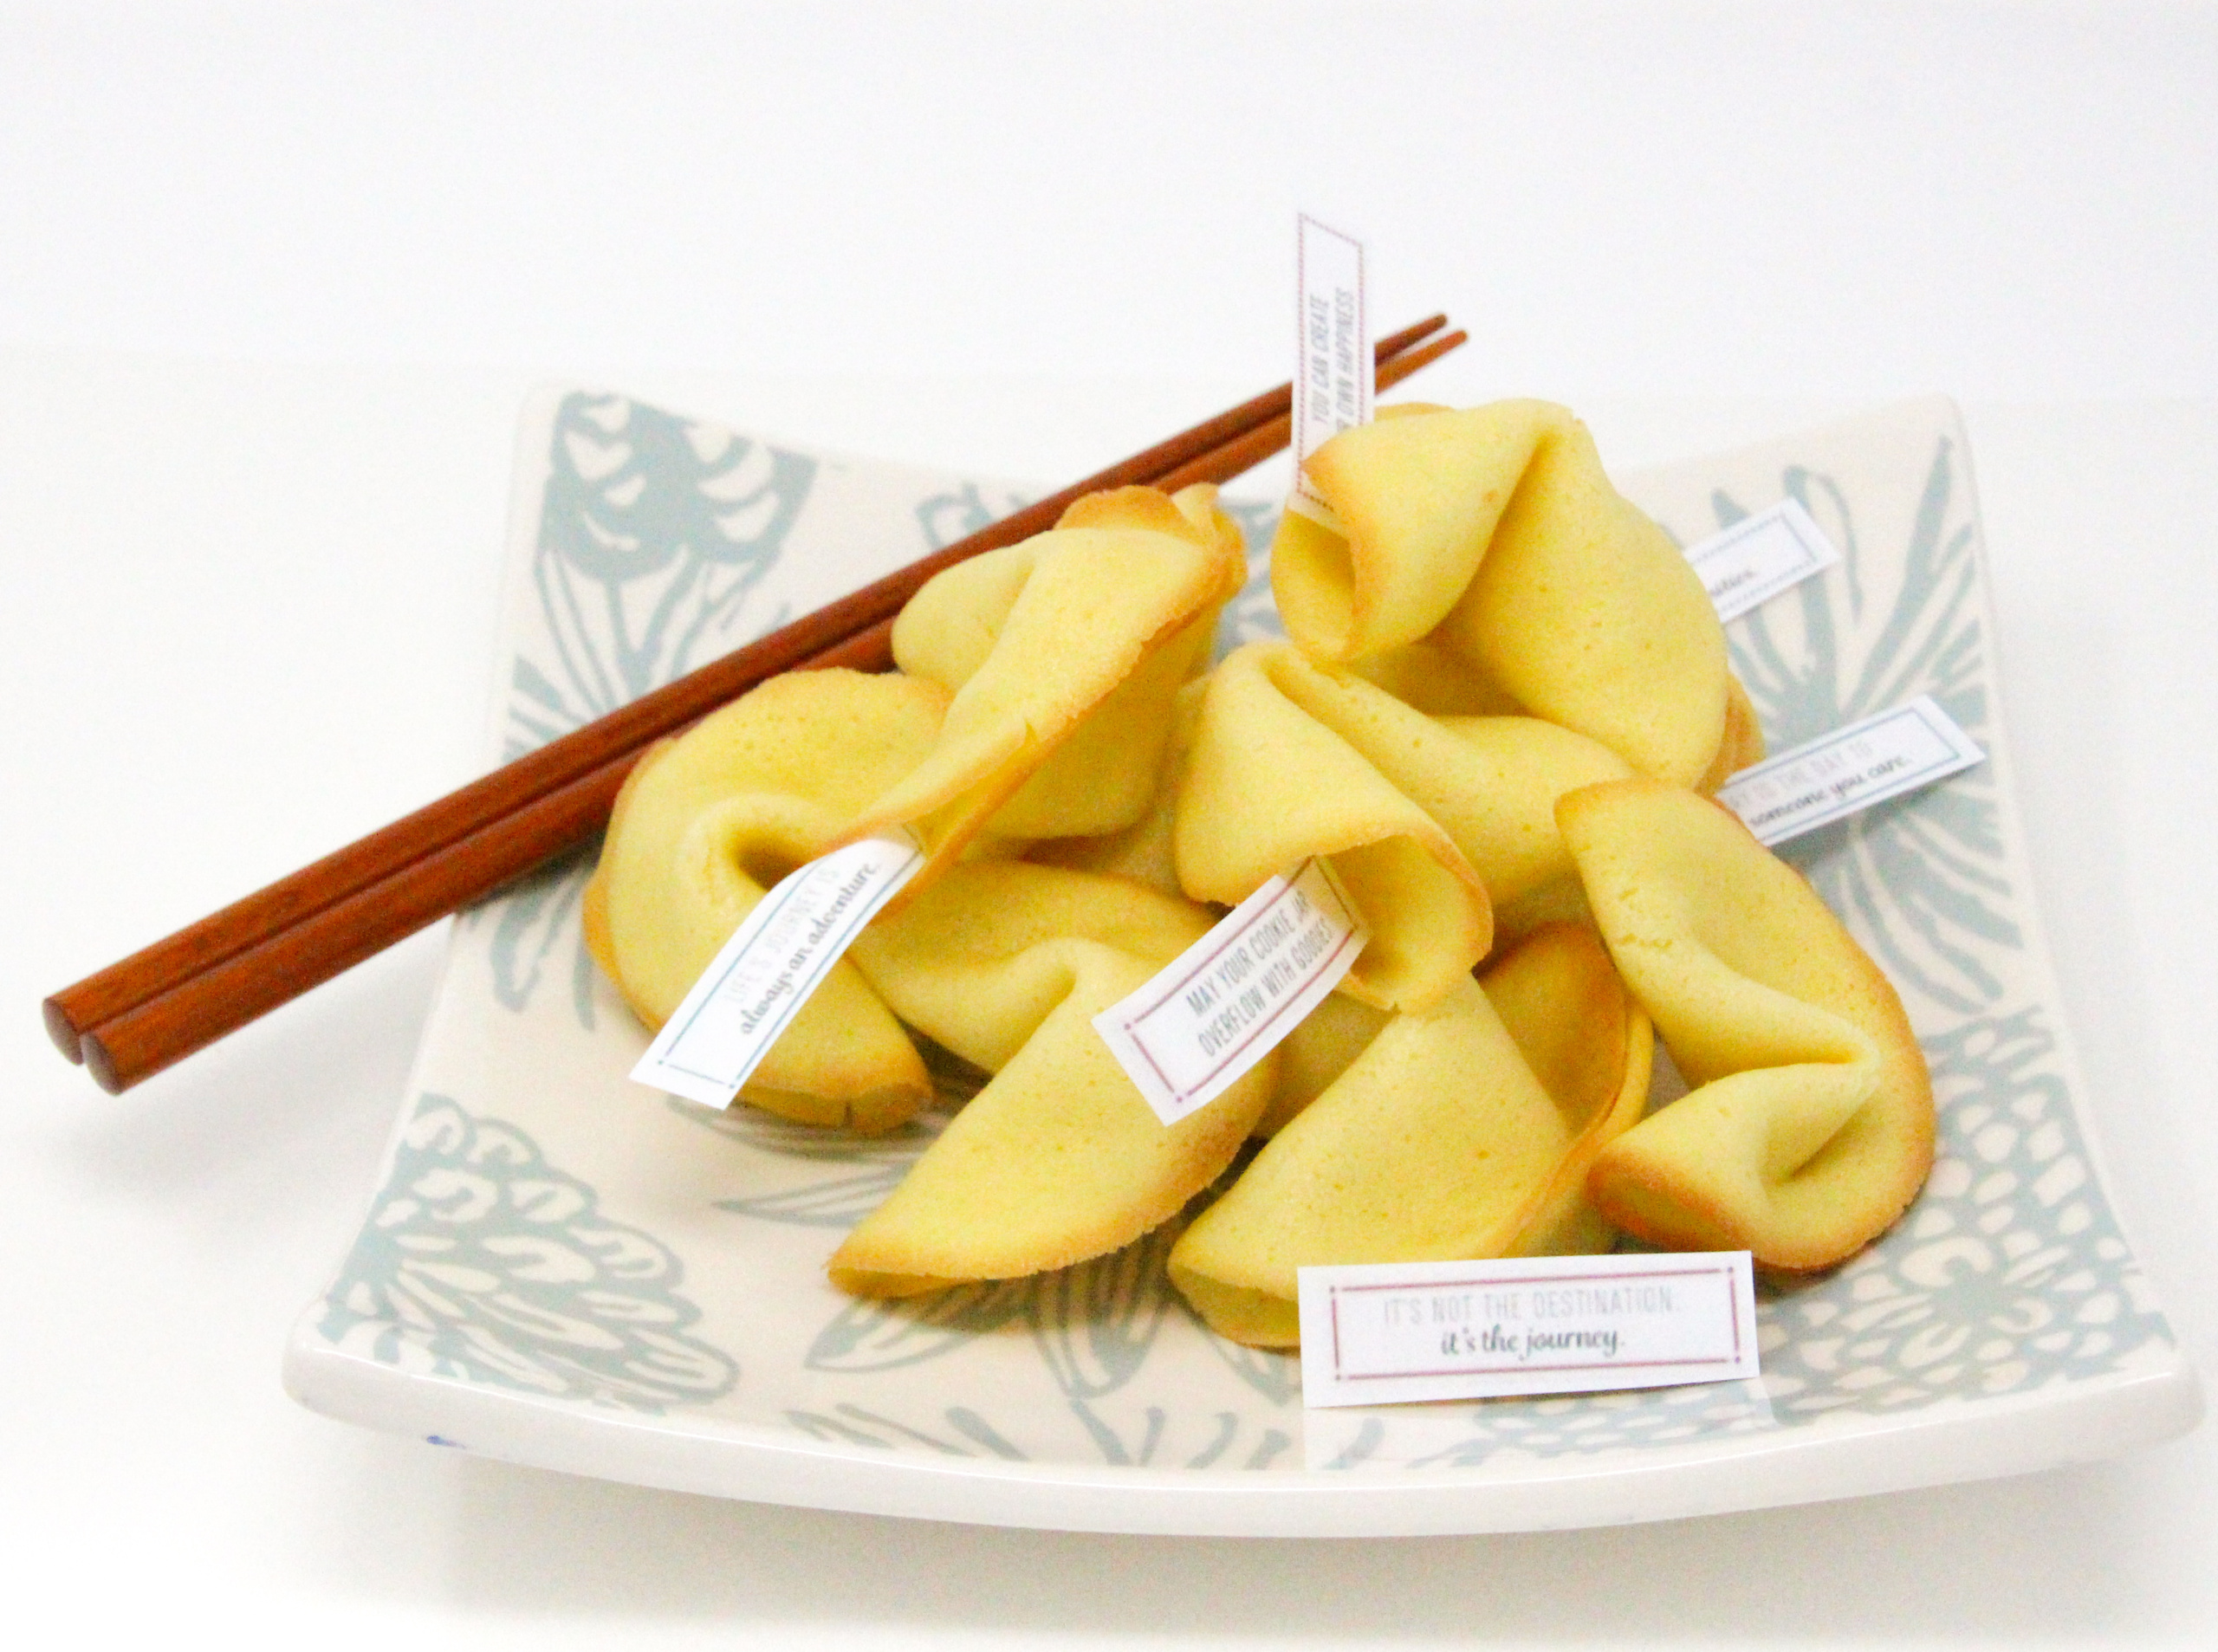 Fated Fortune Cookies are super easy to mix up and are delicious. Baking them requires patience, however, since you can only bake 2, or maybe 3 at a time, and need nimble fingers to form the cookie shape as soon as they are removed from the oven. Recipe shared with permission granted by Jennifer J. Chow, author of ILL-FATED FORTUNE. 